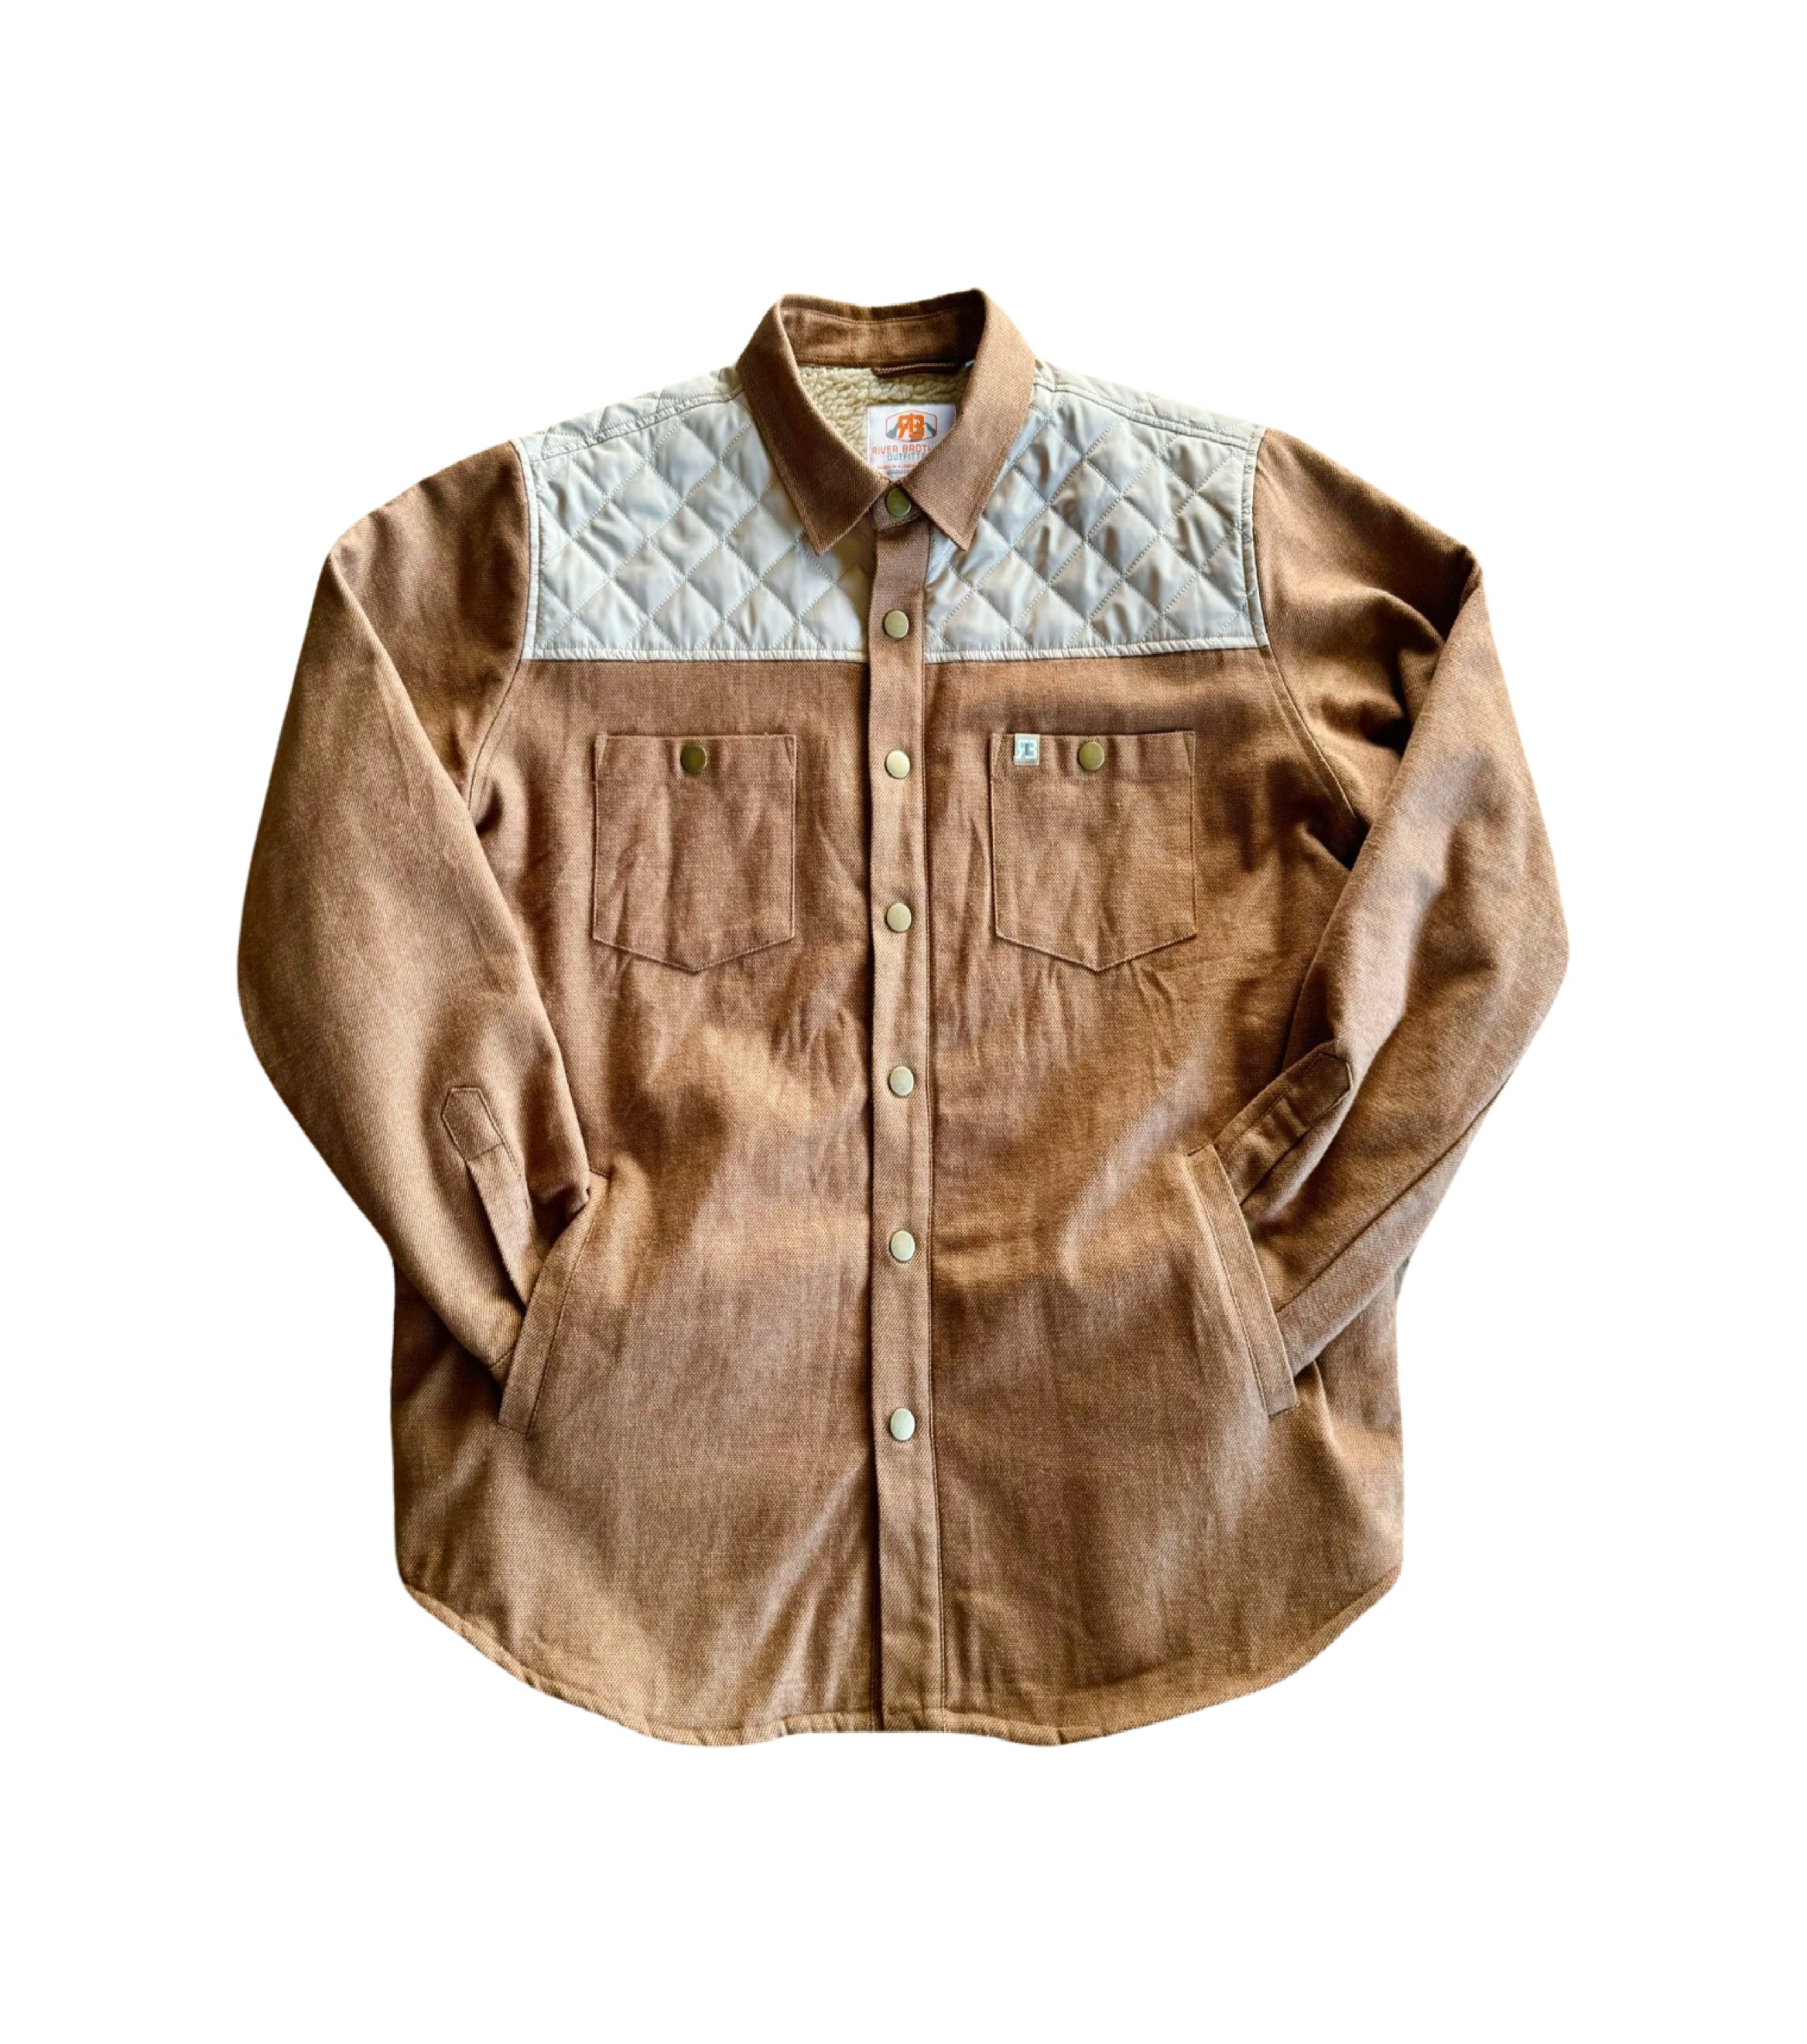 The Camp Jacket